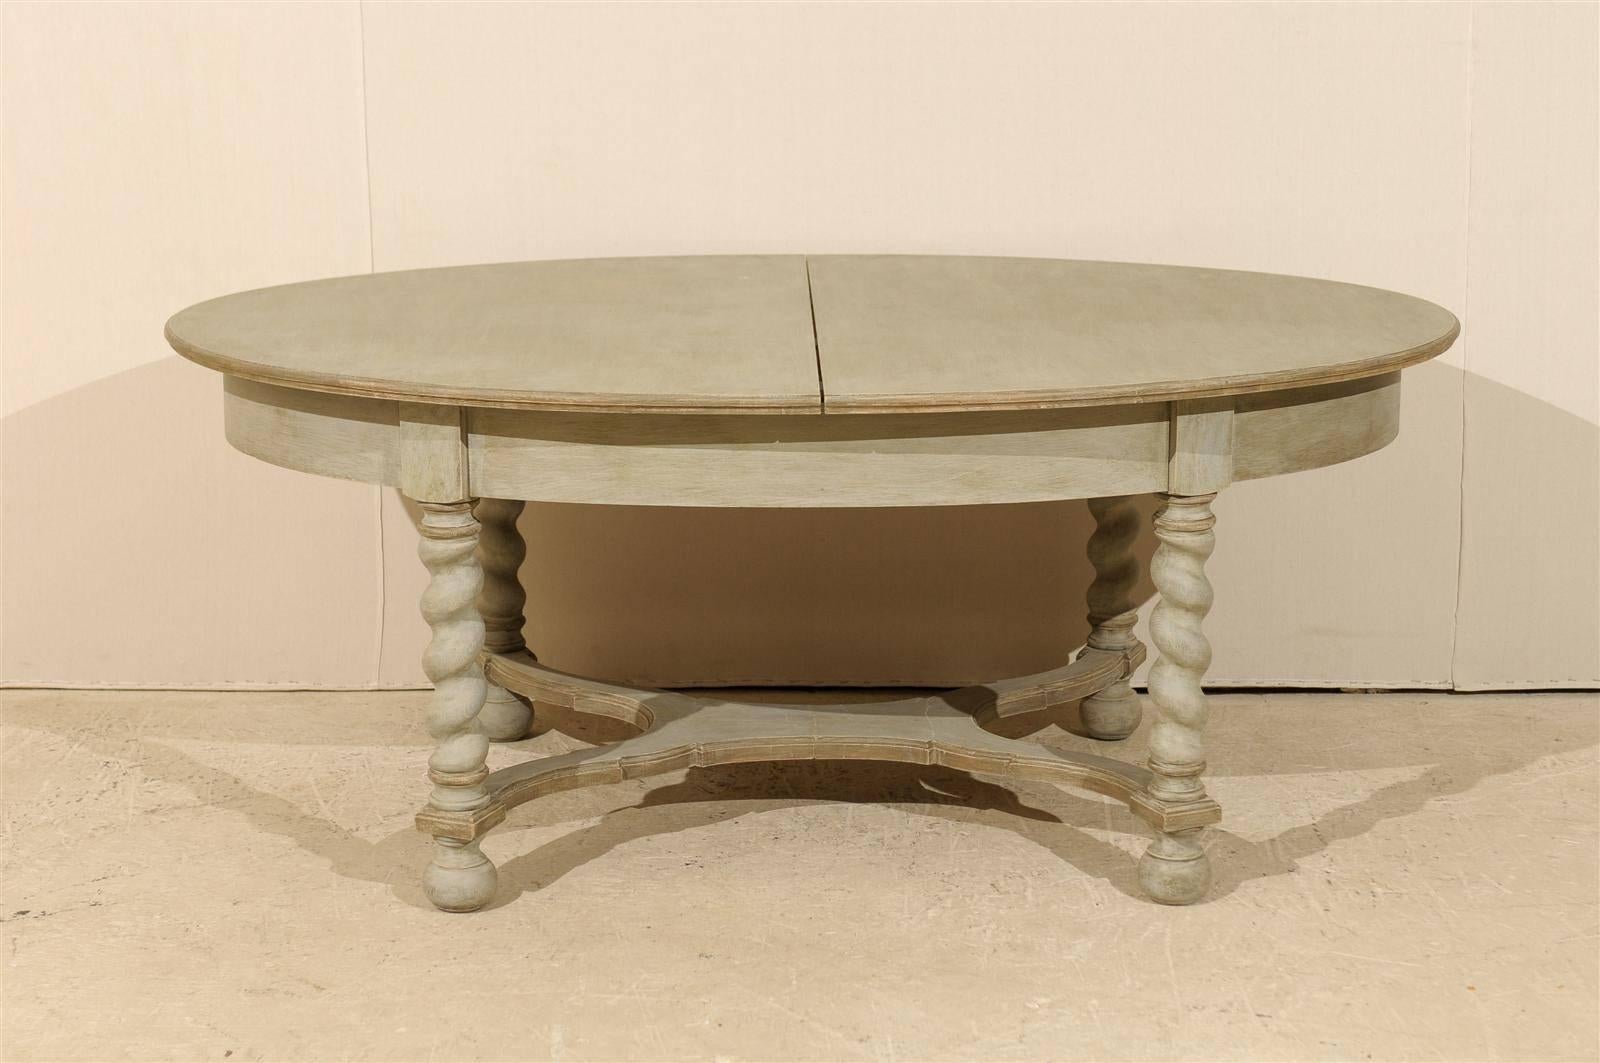 A Swedish Baroque style mid-20th century oval table. This painted wood table features barley twist legs and a nicely shaped cross stretcher. The table is raised on ball feet. The simplicity of the top is nicely balanced by the carving of the legs